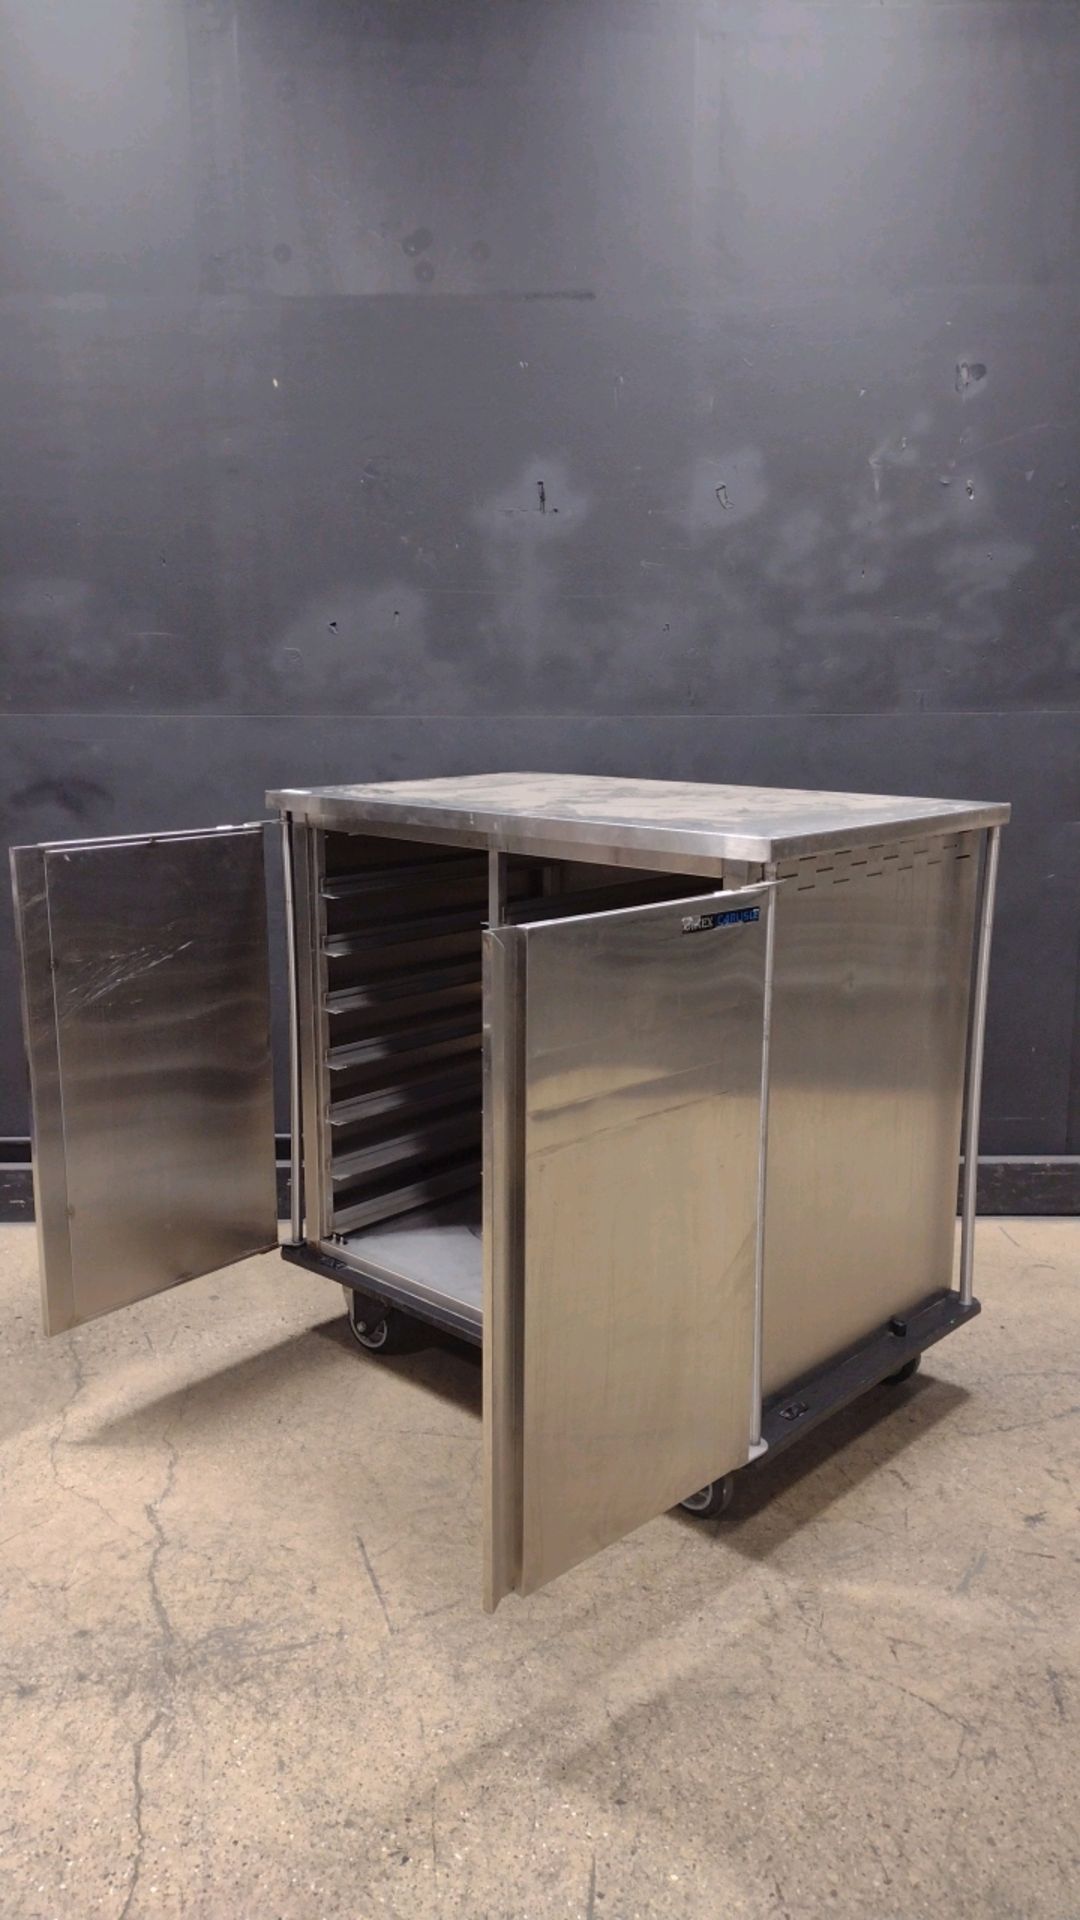 DINEX CARLISLE SS FOOD TRAY CART (LOCATED AT 3325 MOUNT PROSPECT ROAD, FRANKLIN PARK, IL, 60131)